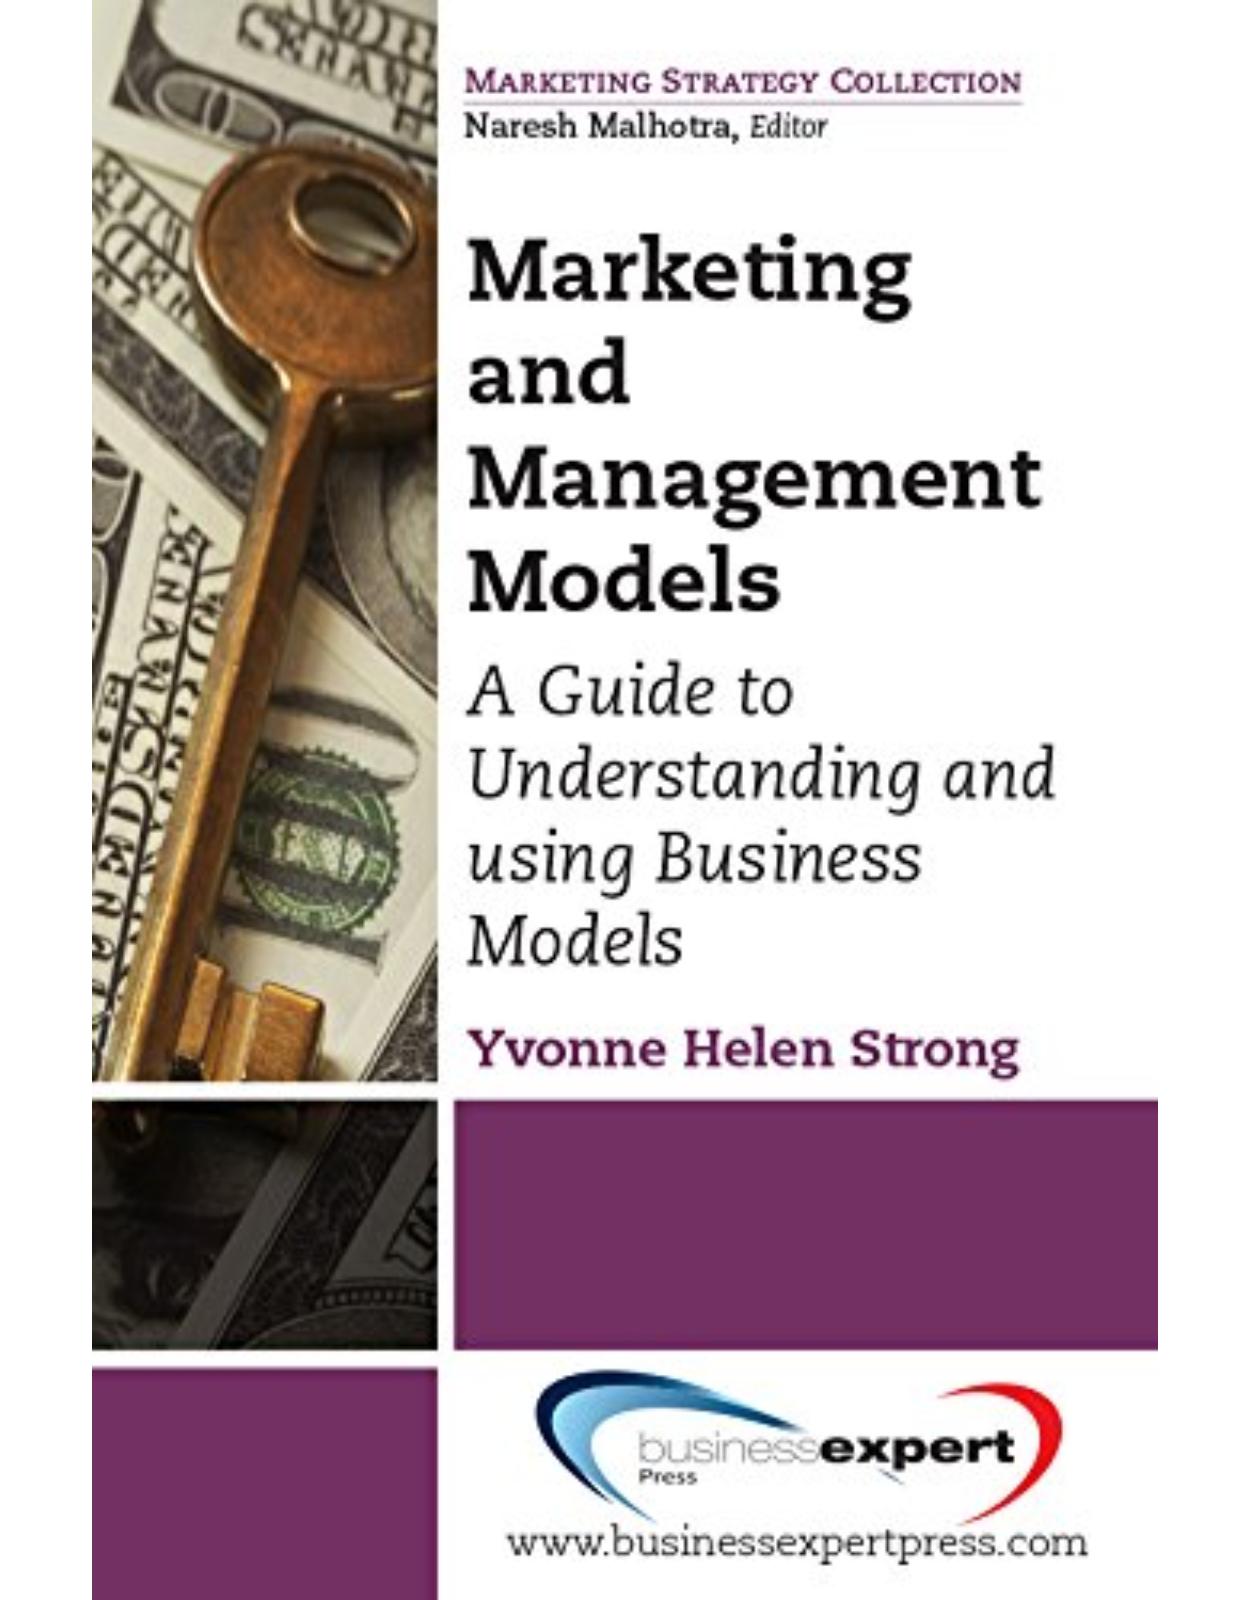 Marketing and Management Models: A Guide to Understanding and Using Business Models (Marketing Strategy Collection)